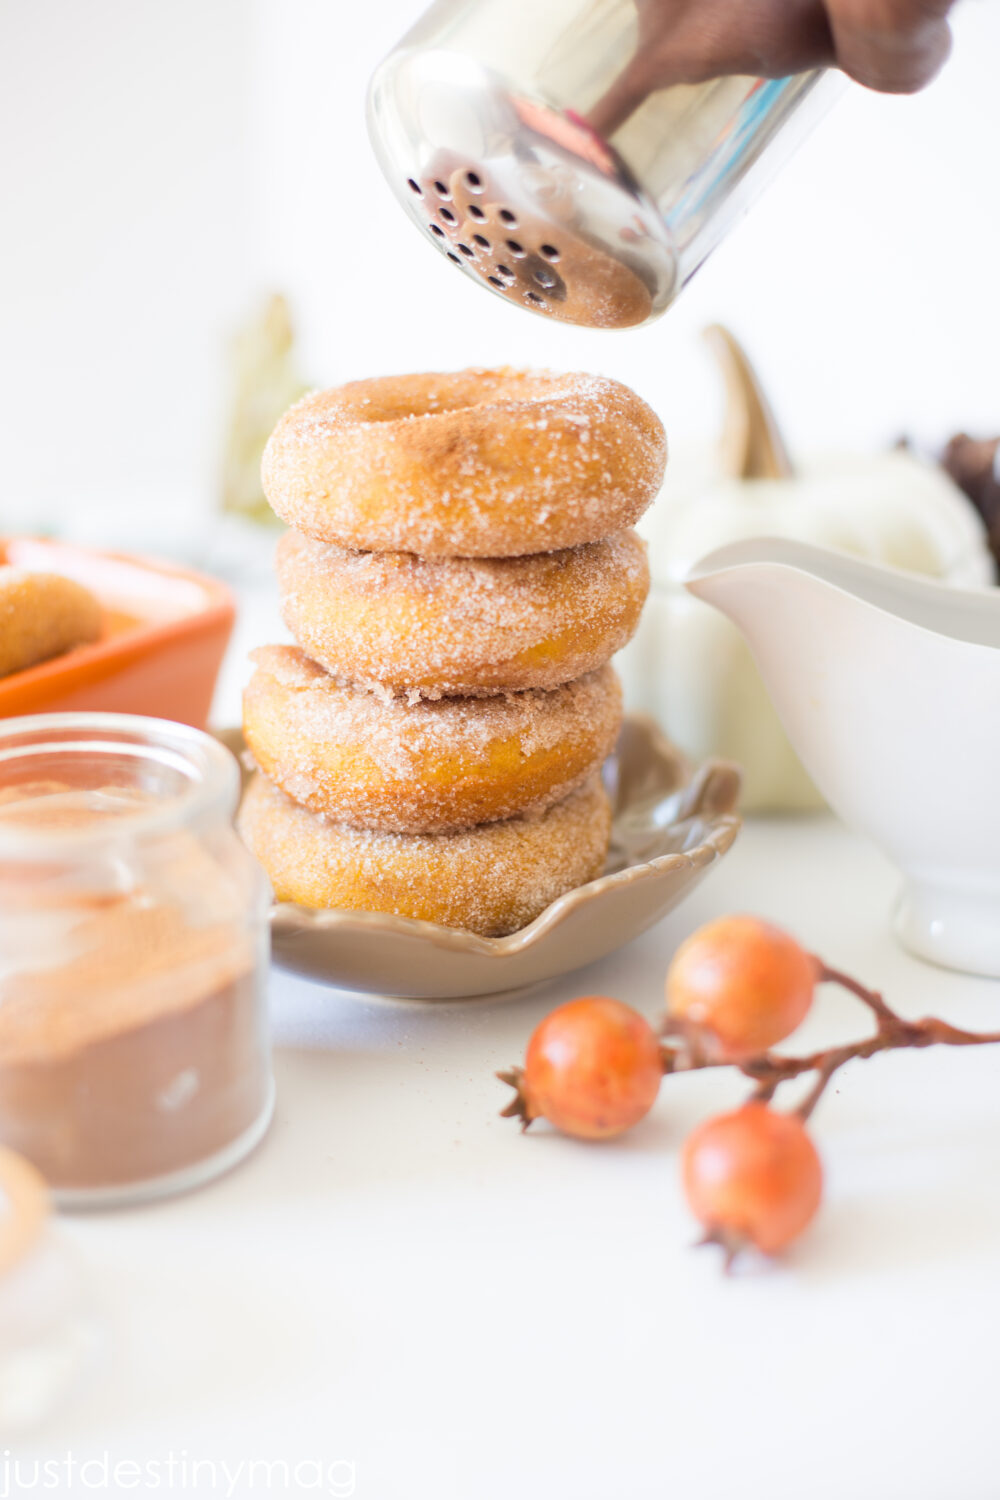 Pumpkin Donuts with Cinnamon and Sugar perfect for fall